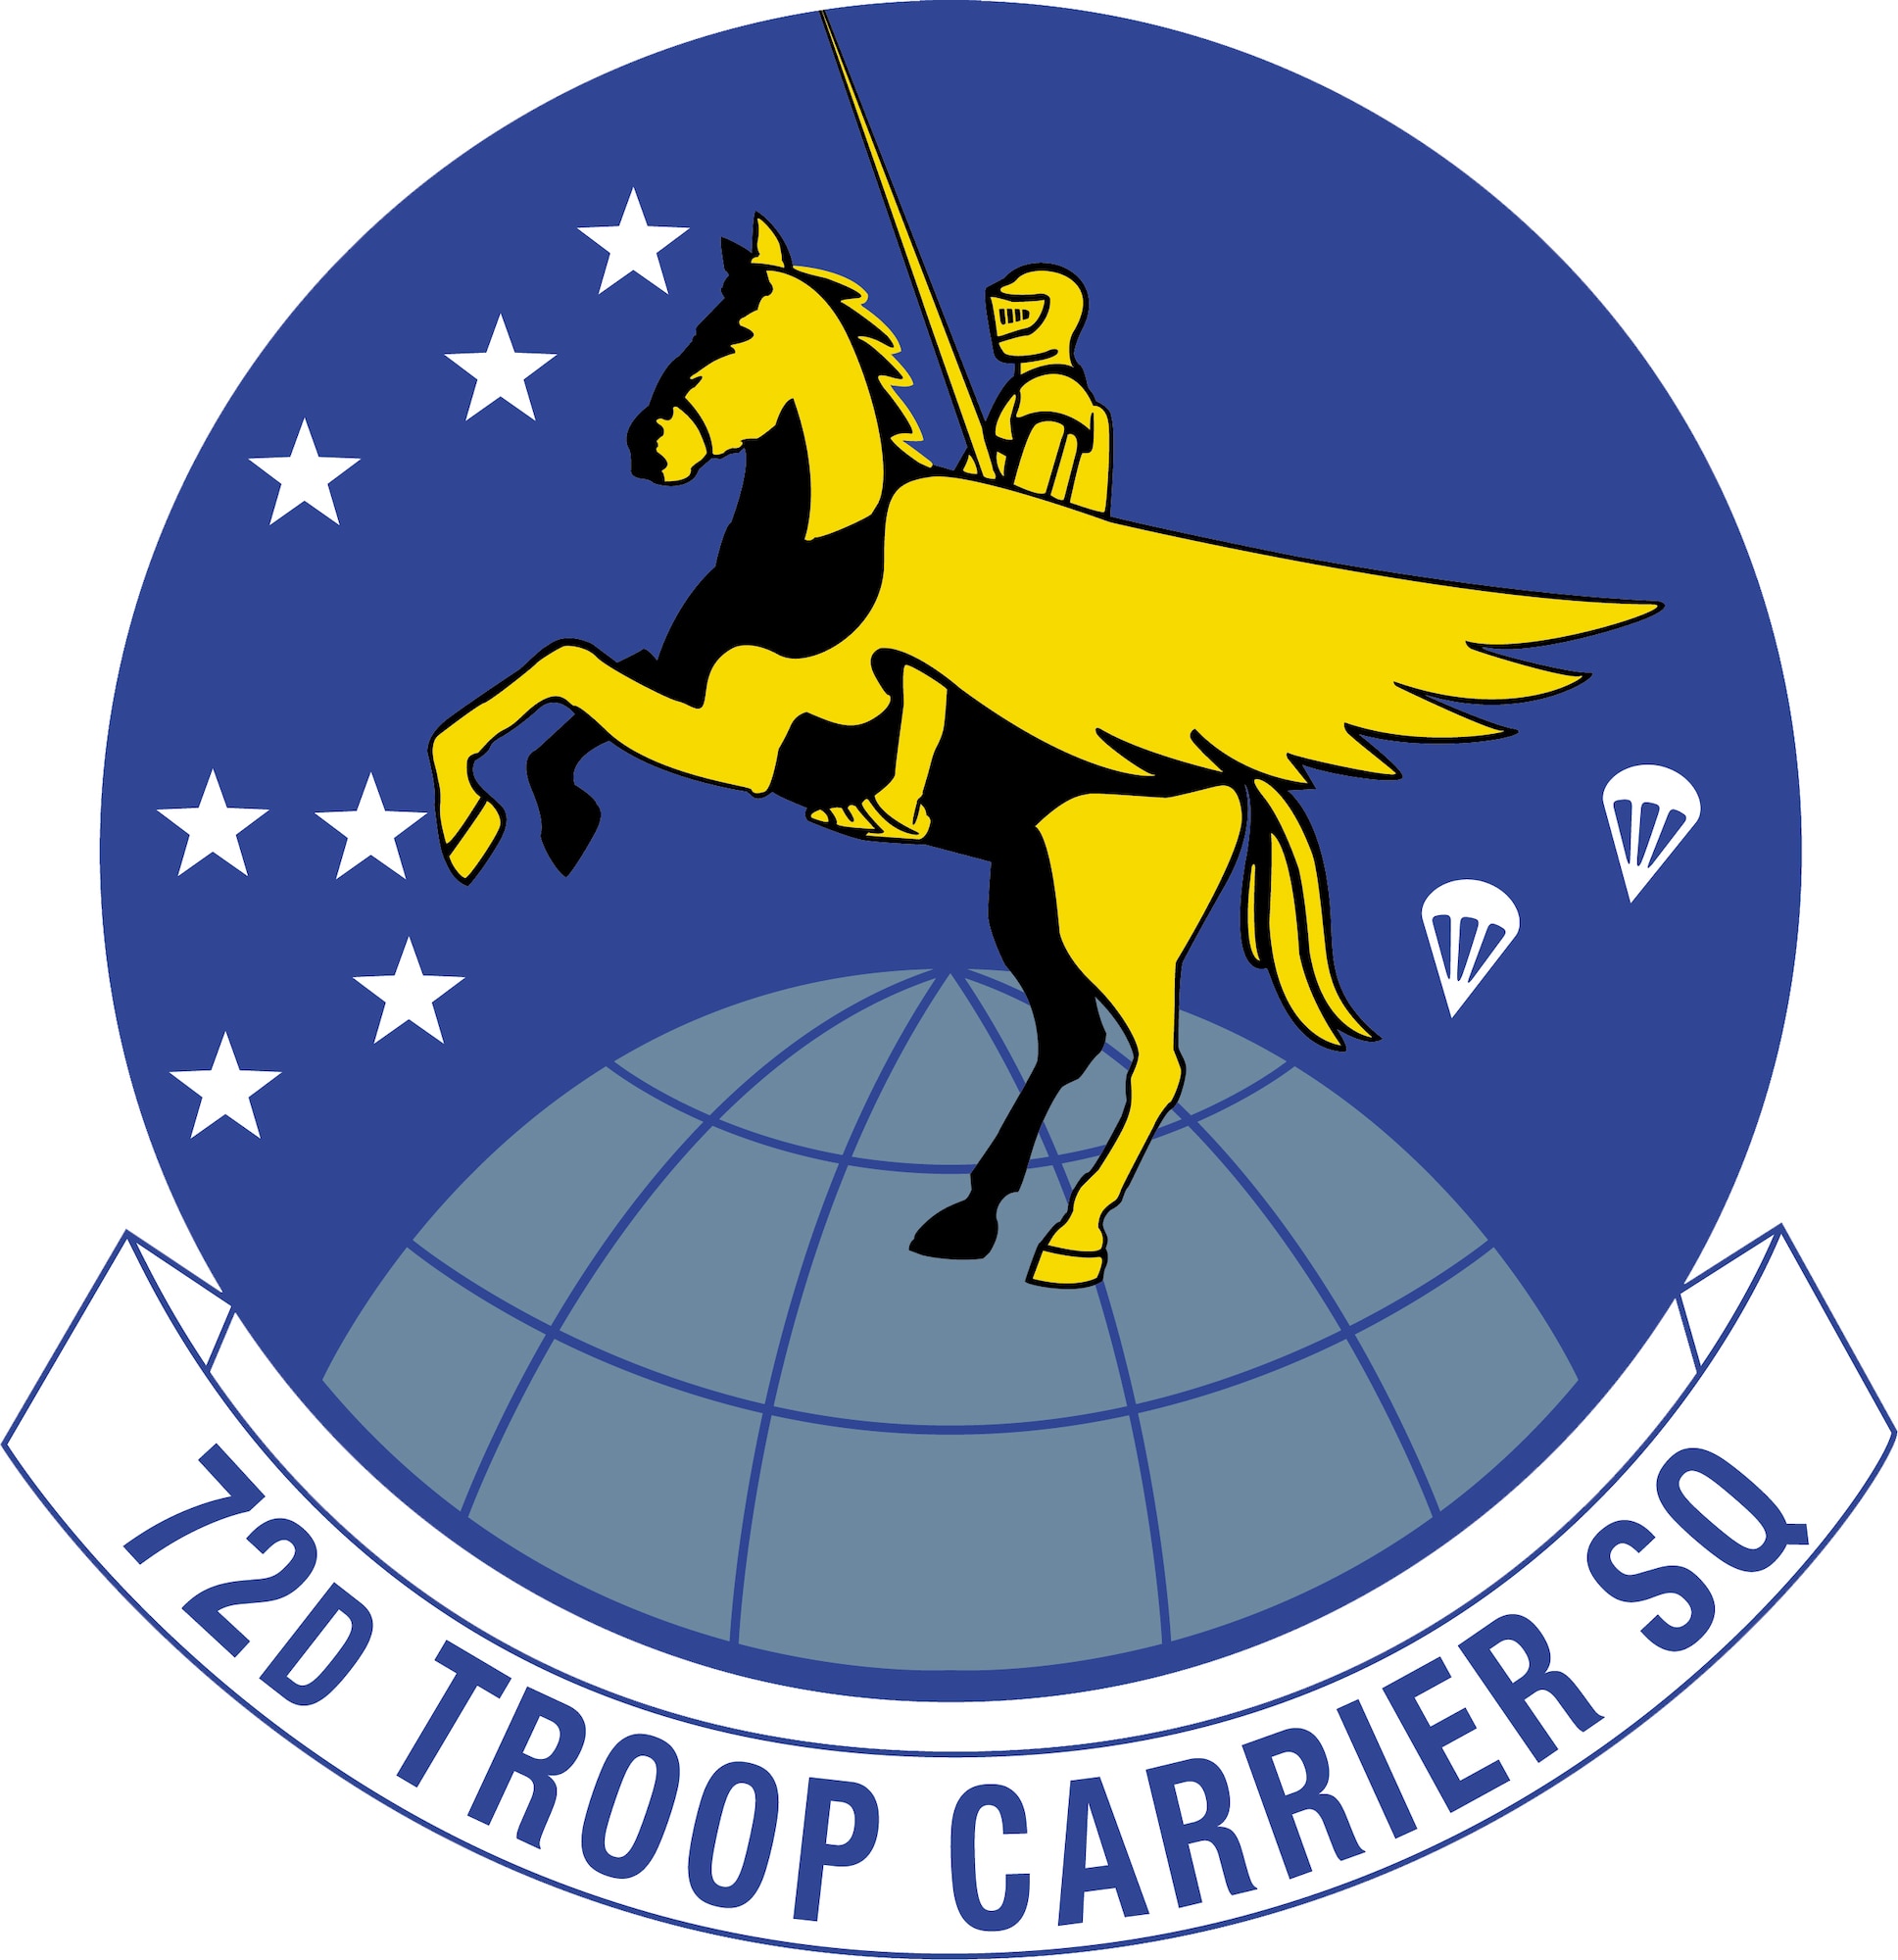 The 434th Air Refueling Wing has a 70-year history dating to World War II. The 434th Troop Carrier Group was activated in 1943 and contained the 71st, 72nd, 73rd and 74th Troop Carrier Squadrons, all of which participated in the Allies invasion of Normandy, France, flying C-47 Skytrains. (U.S. Air Force graphic)
